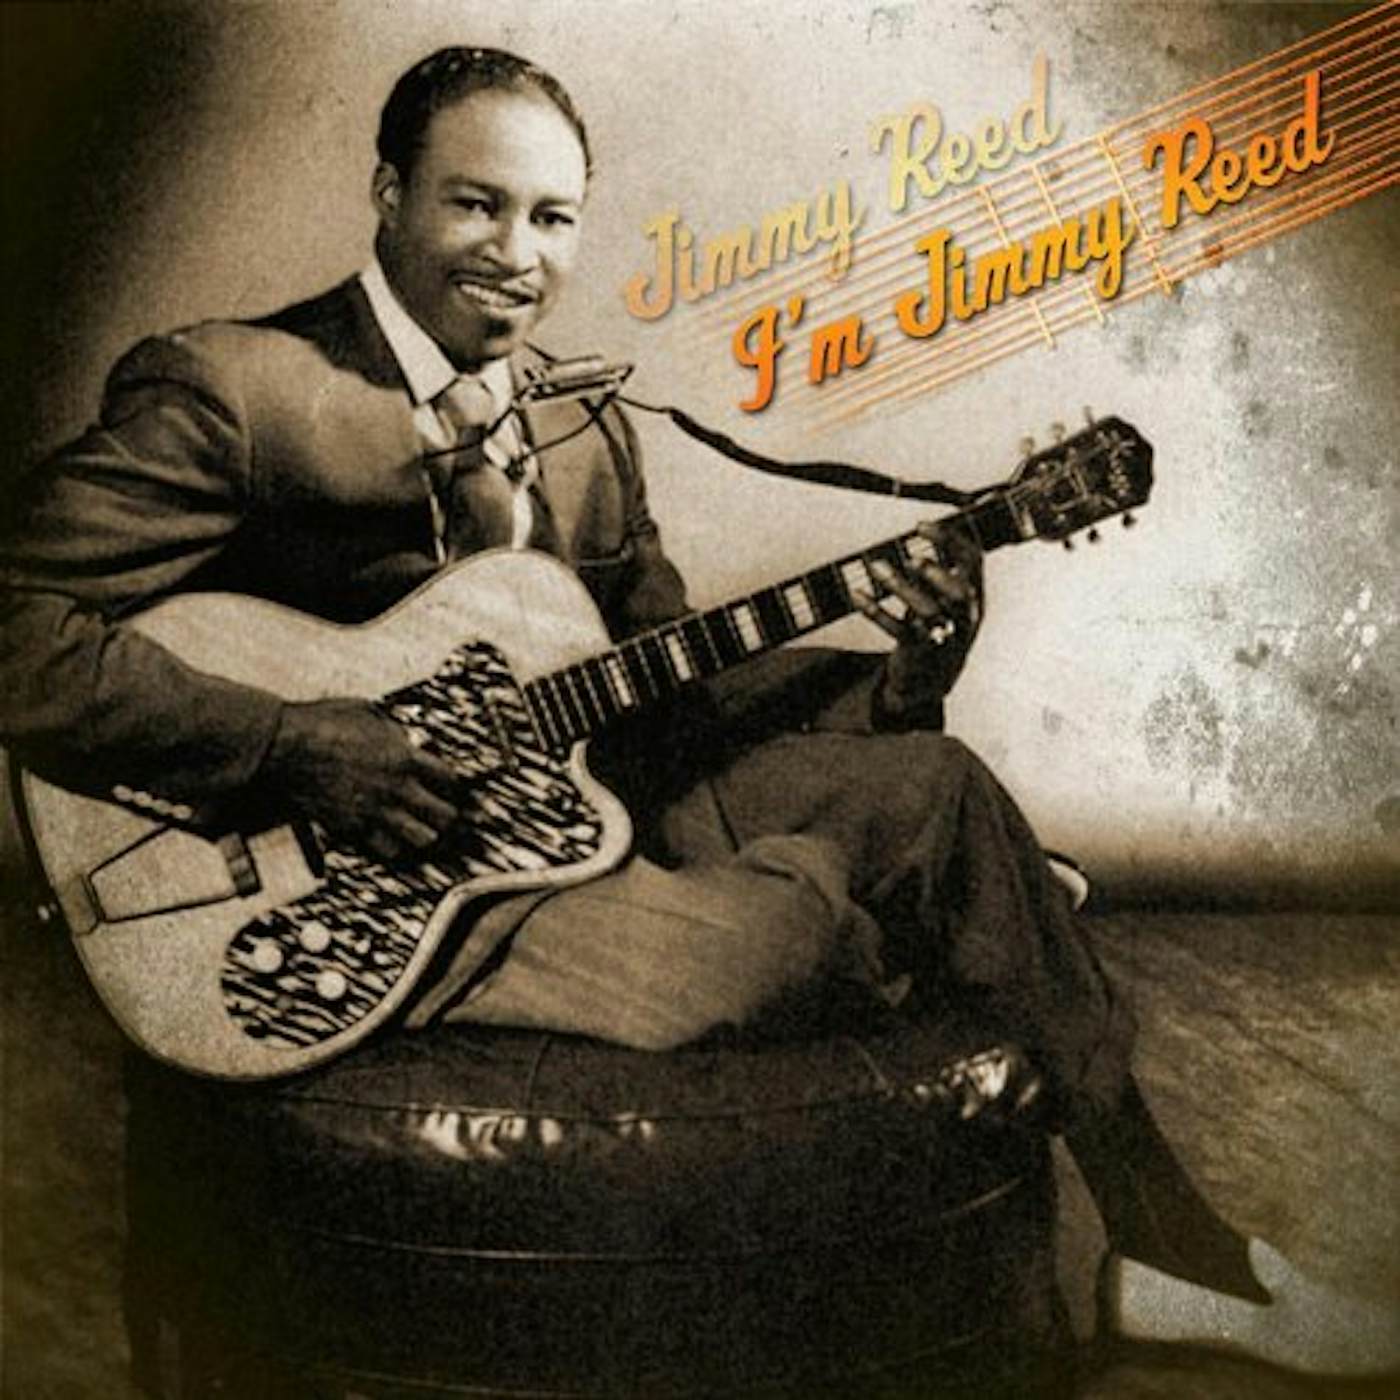 I'M JIMMY REED / ROCKIN WITH REED Vinyl Record